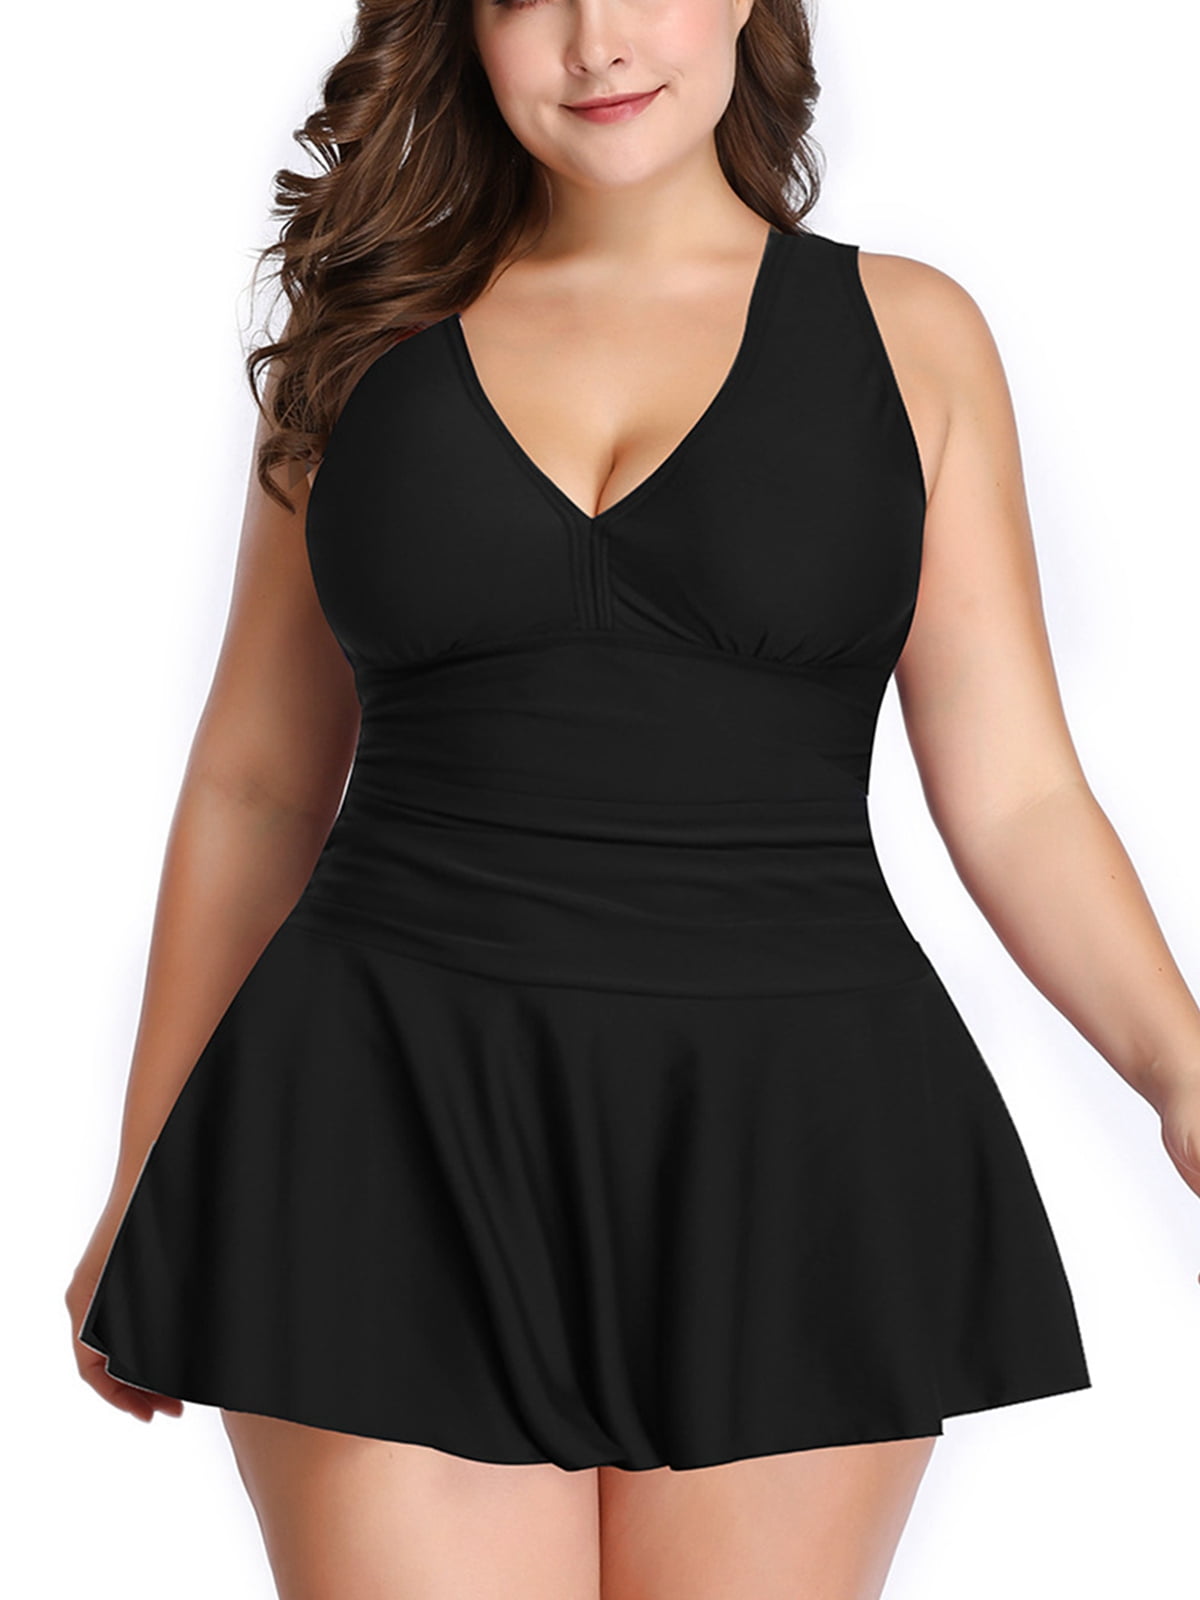 CUE AIR Women's Plus Size Swim Dress 2-Piece Swimsuit with Flared Skirt ...